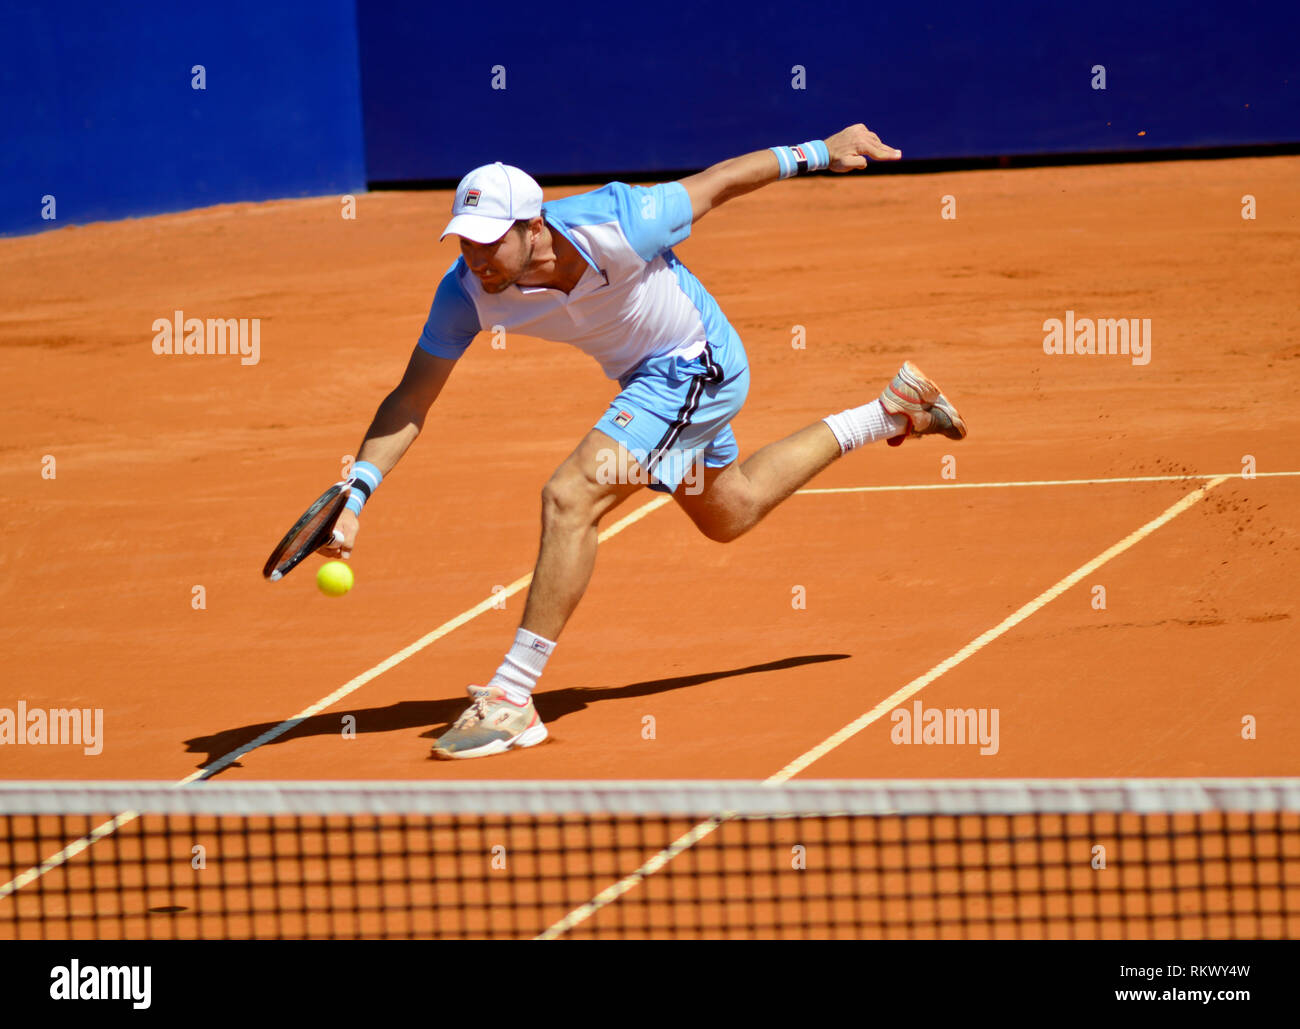 Buenos Aires, Argentina. 12th Feb 2019. Dusan Lajovic (Serbia) lost against Leonardo Mayer (Argentina) in the Argentina Open, an ATP 250 tennis tournament Credit: Mariano Garcia/Alamy Live News Stock Photo